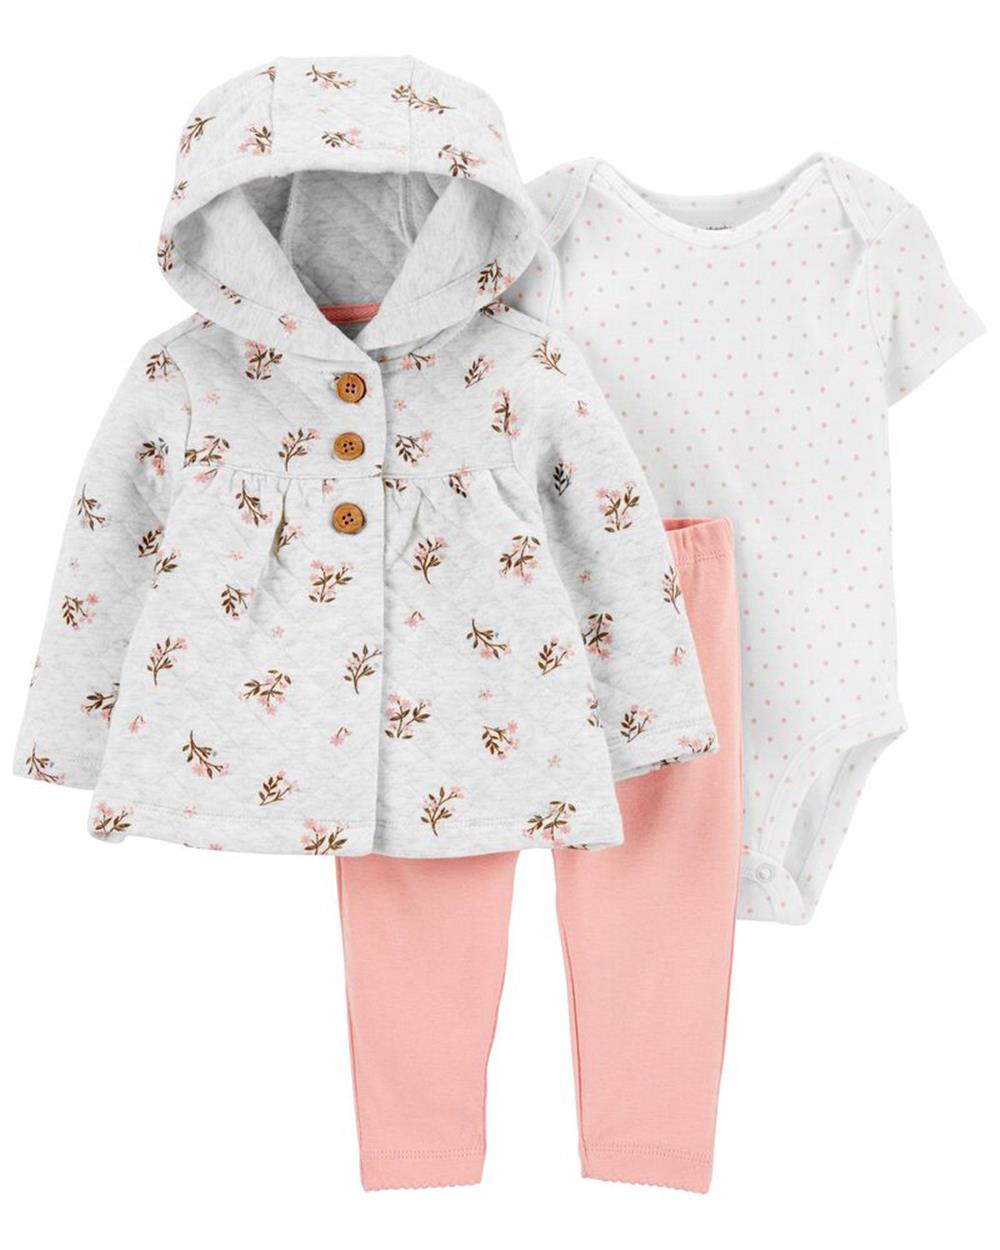 Carters 3-Pack Quilted Little Cardigan Set